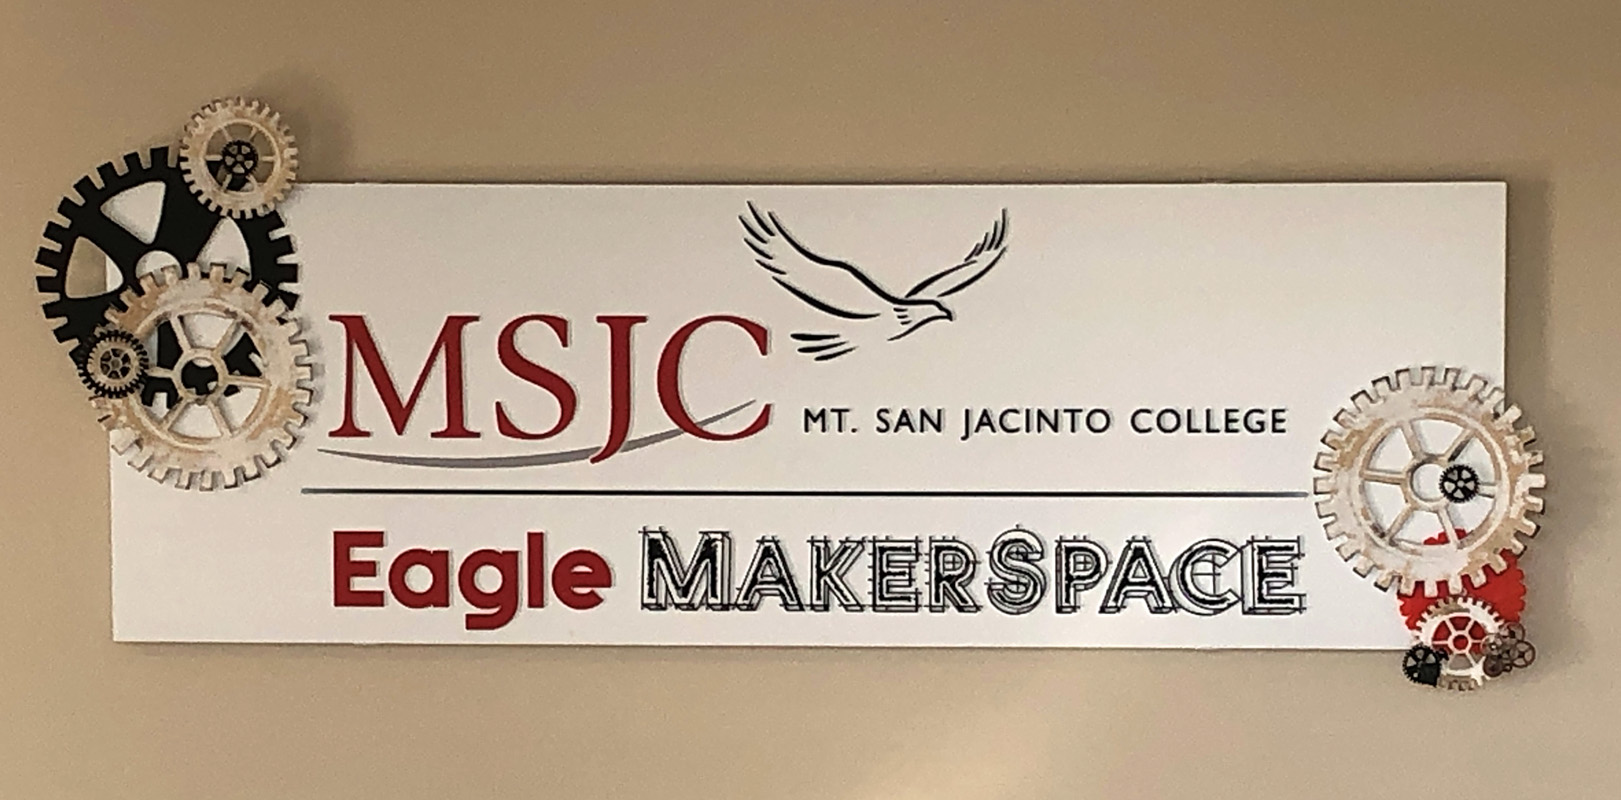 Technology Advances in the Eagle MakerSpace